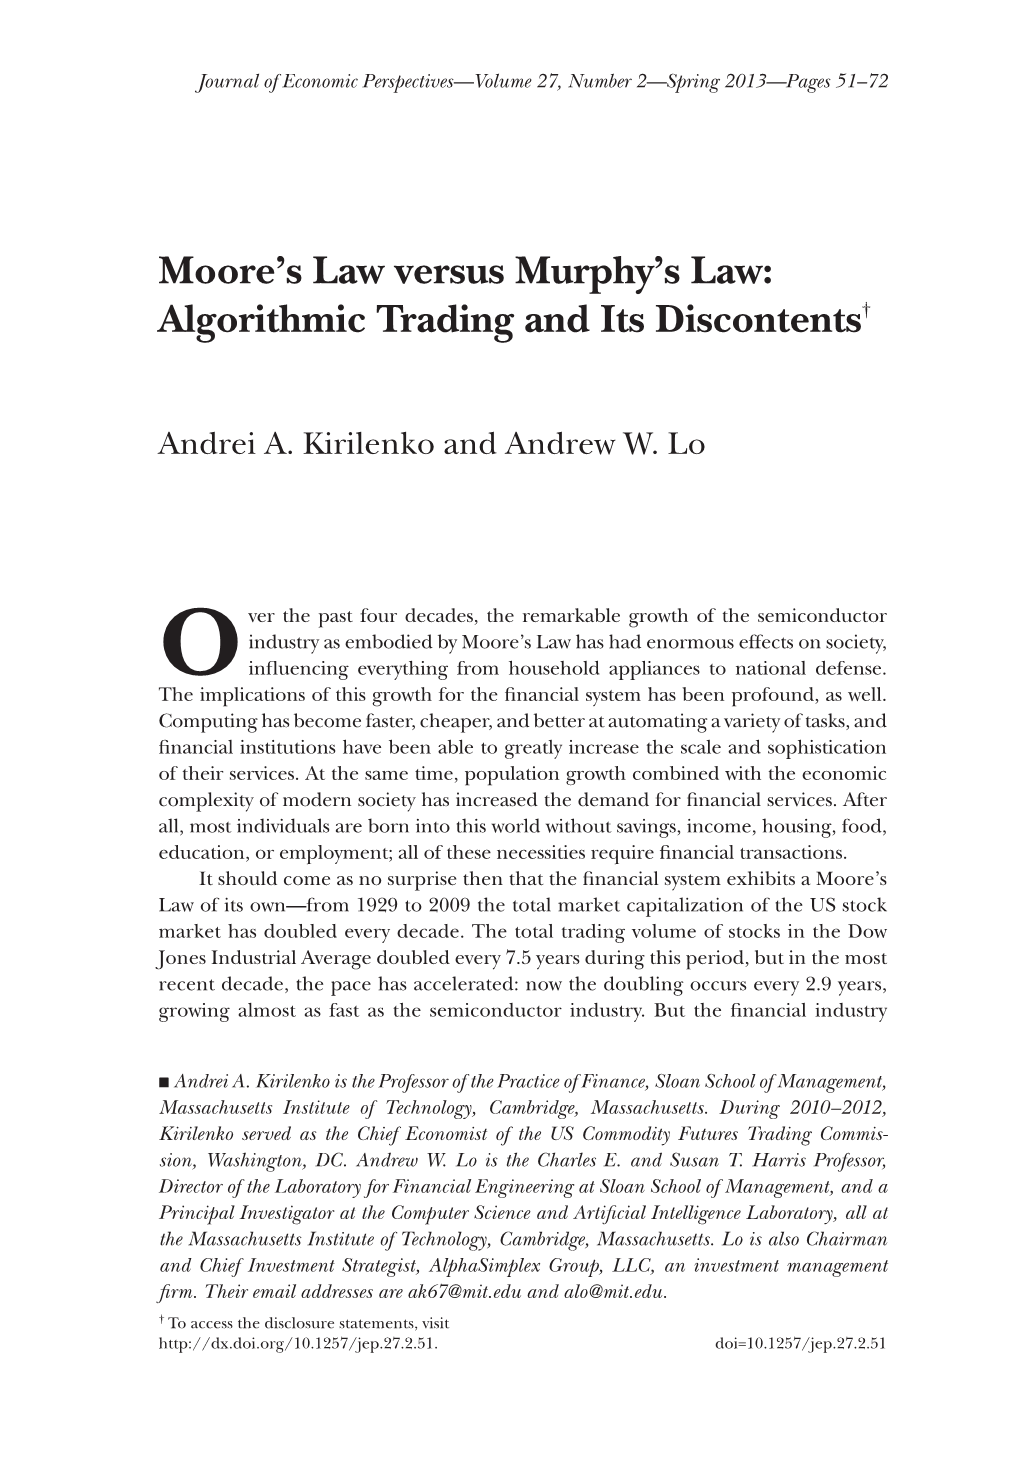 Moore's Law Versus Murphy's Law: Algorithmic Trading and Its